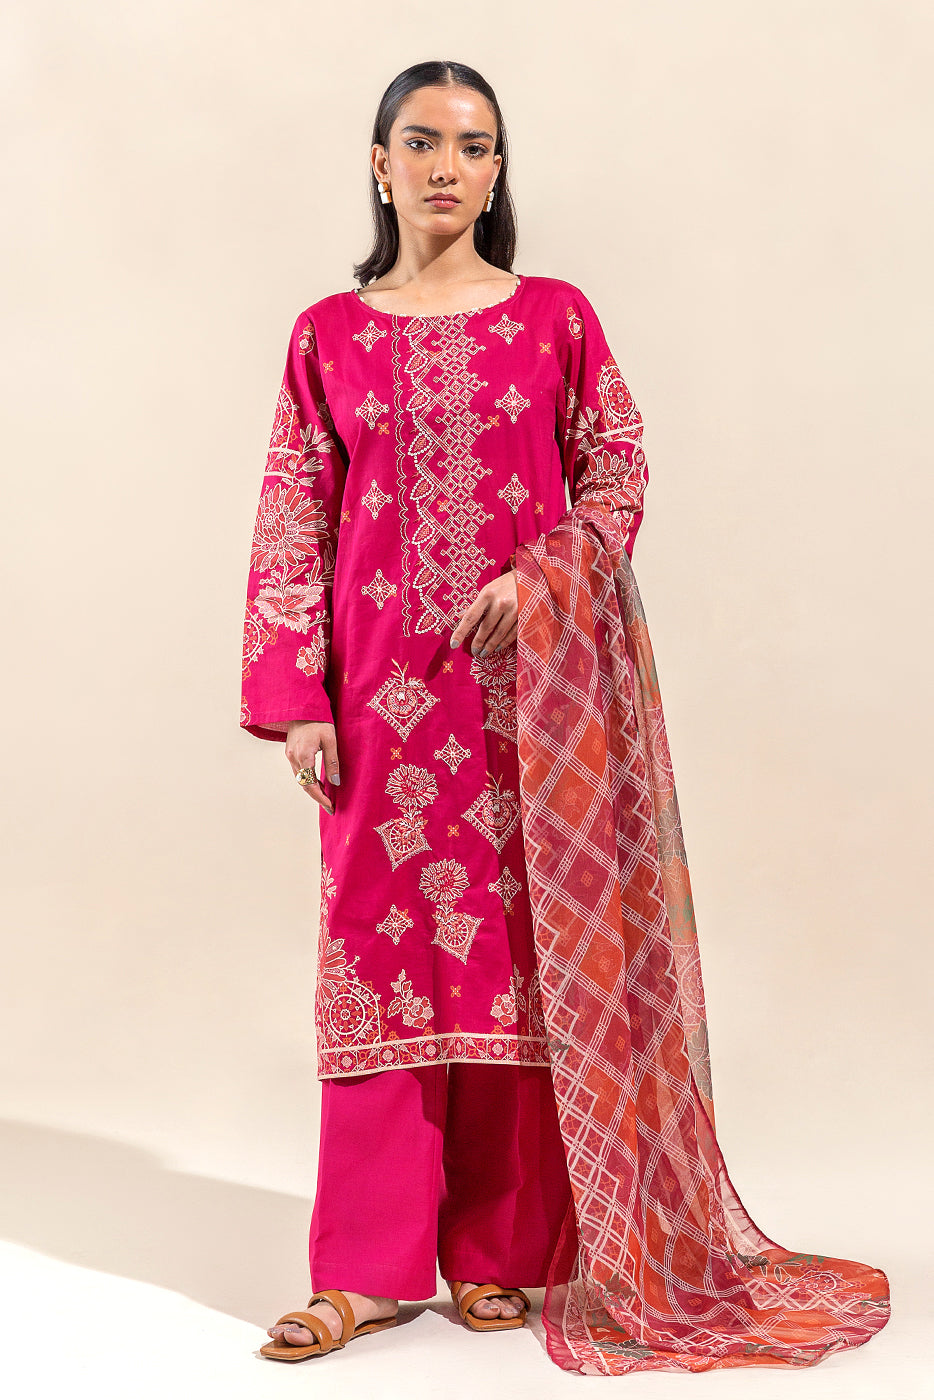 3 PIECE EMBROIDERED LAWN SUIT-SCARLET STONE (UNSTITCHED)